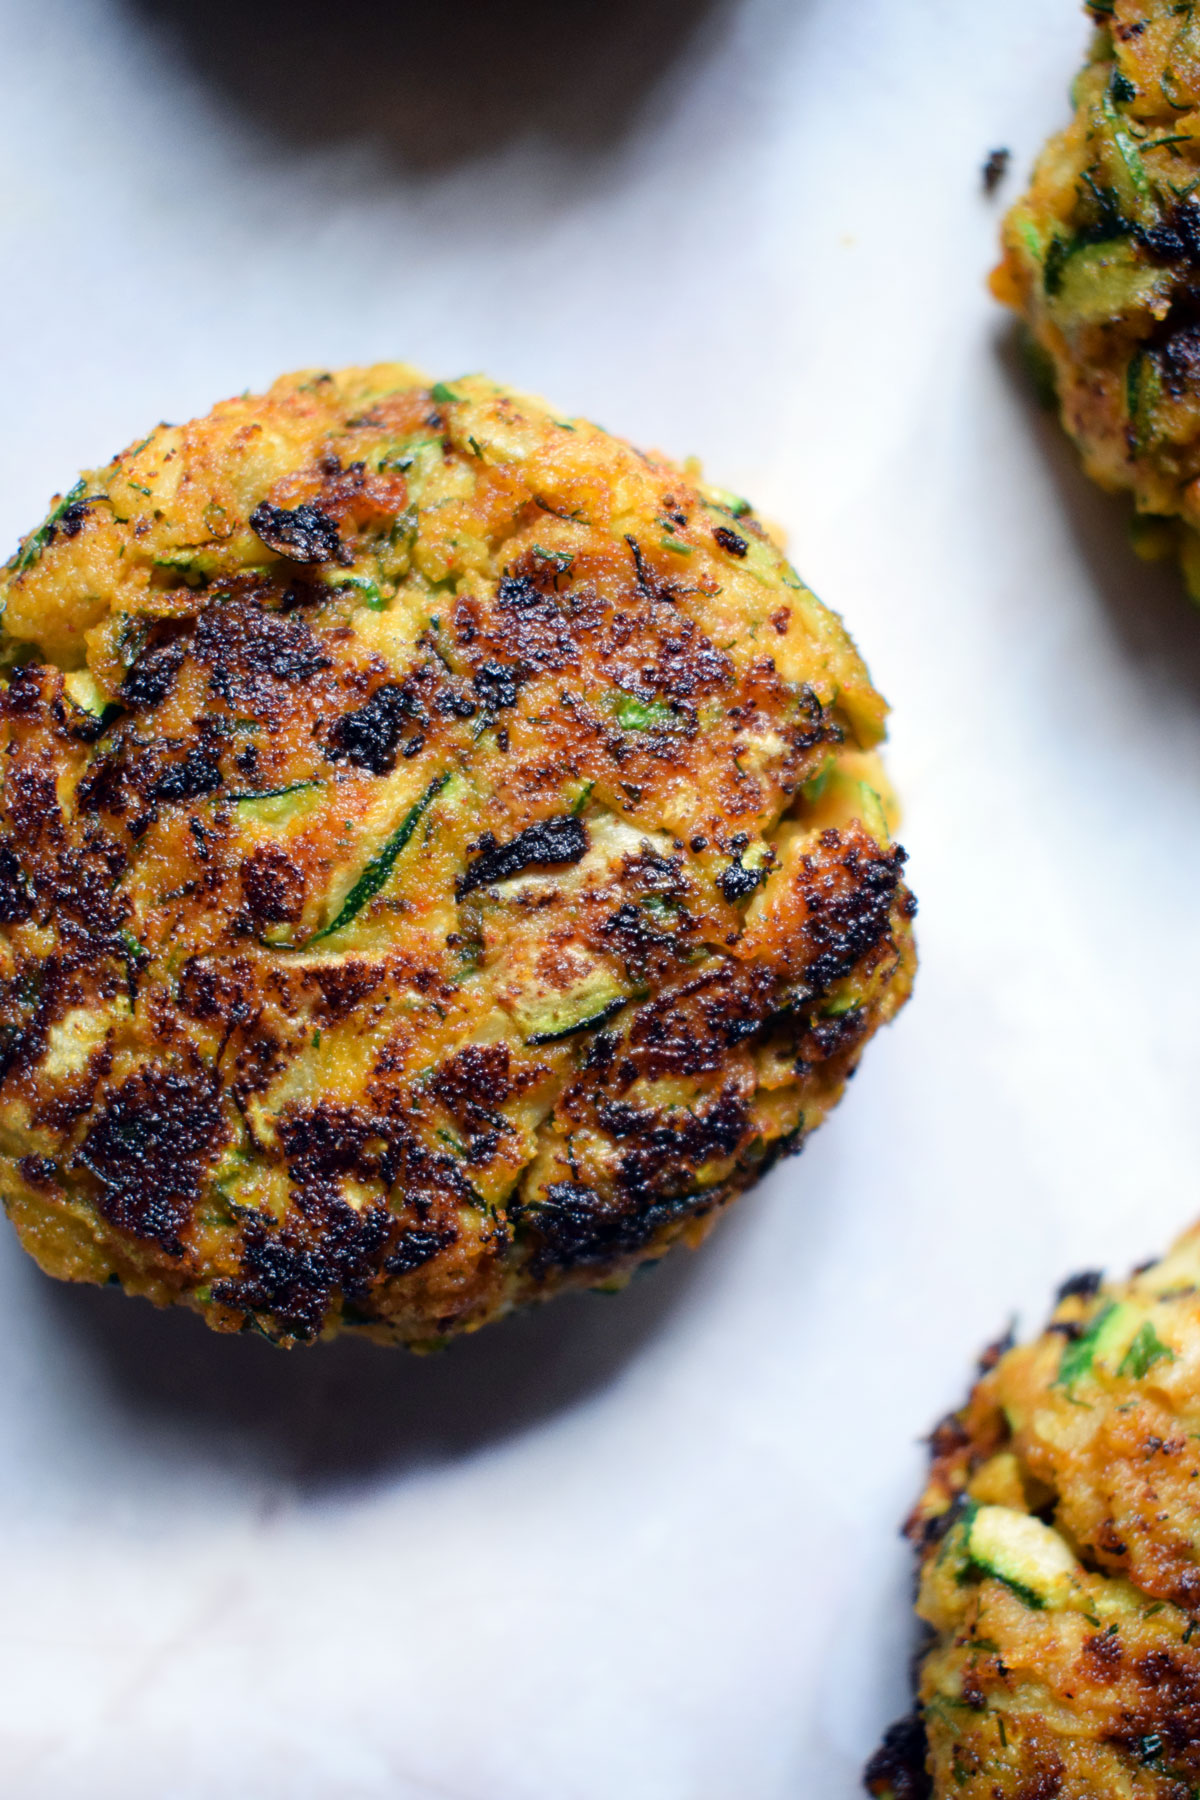 Courgette Fritters - Let's Eat Smart